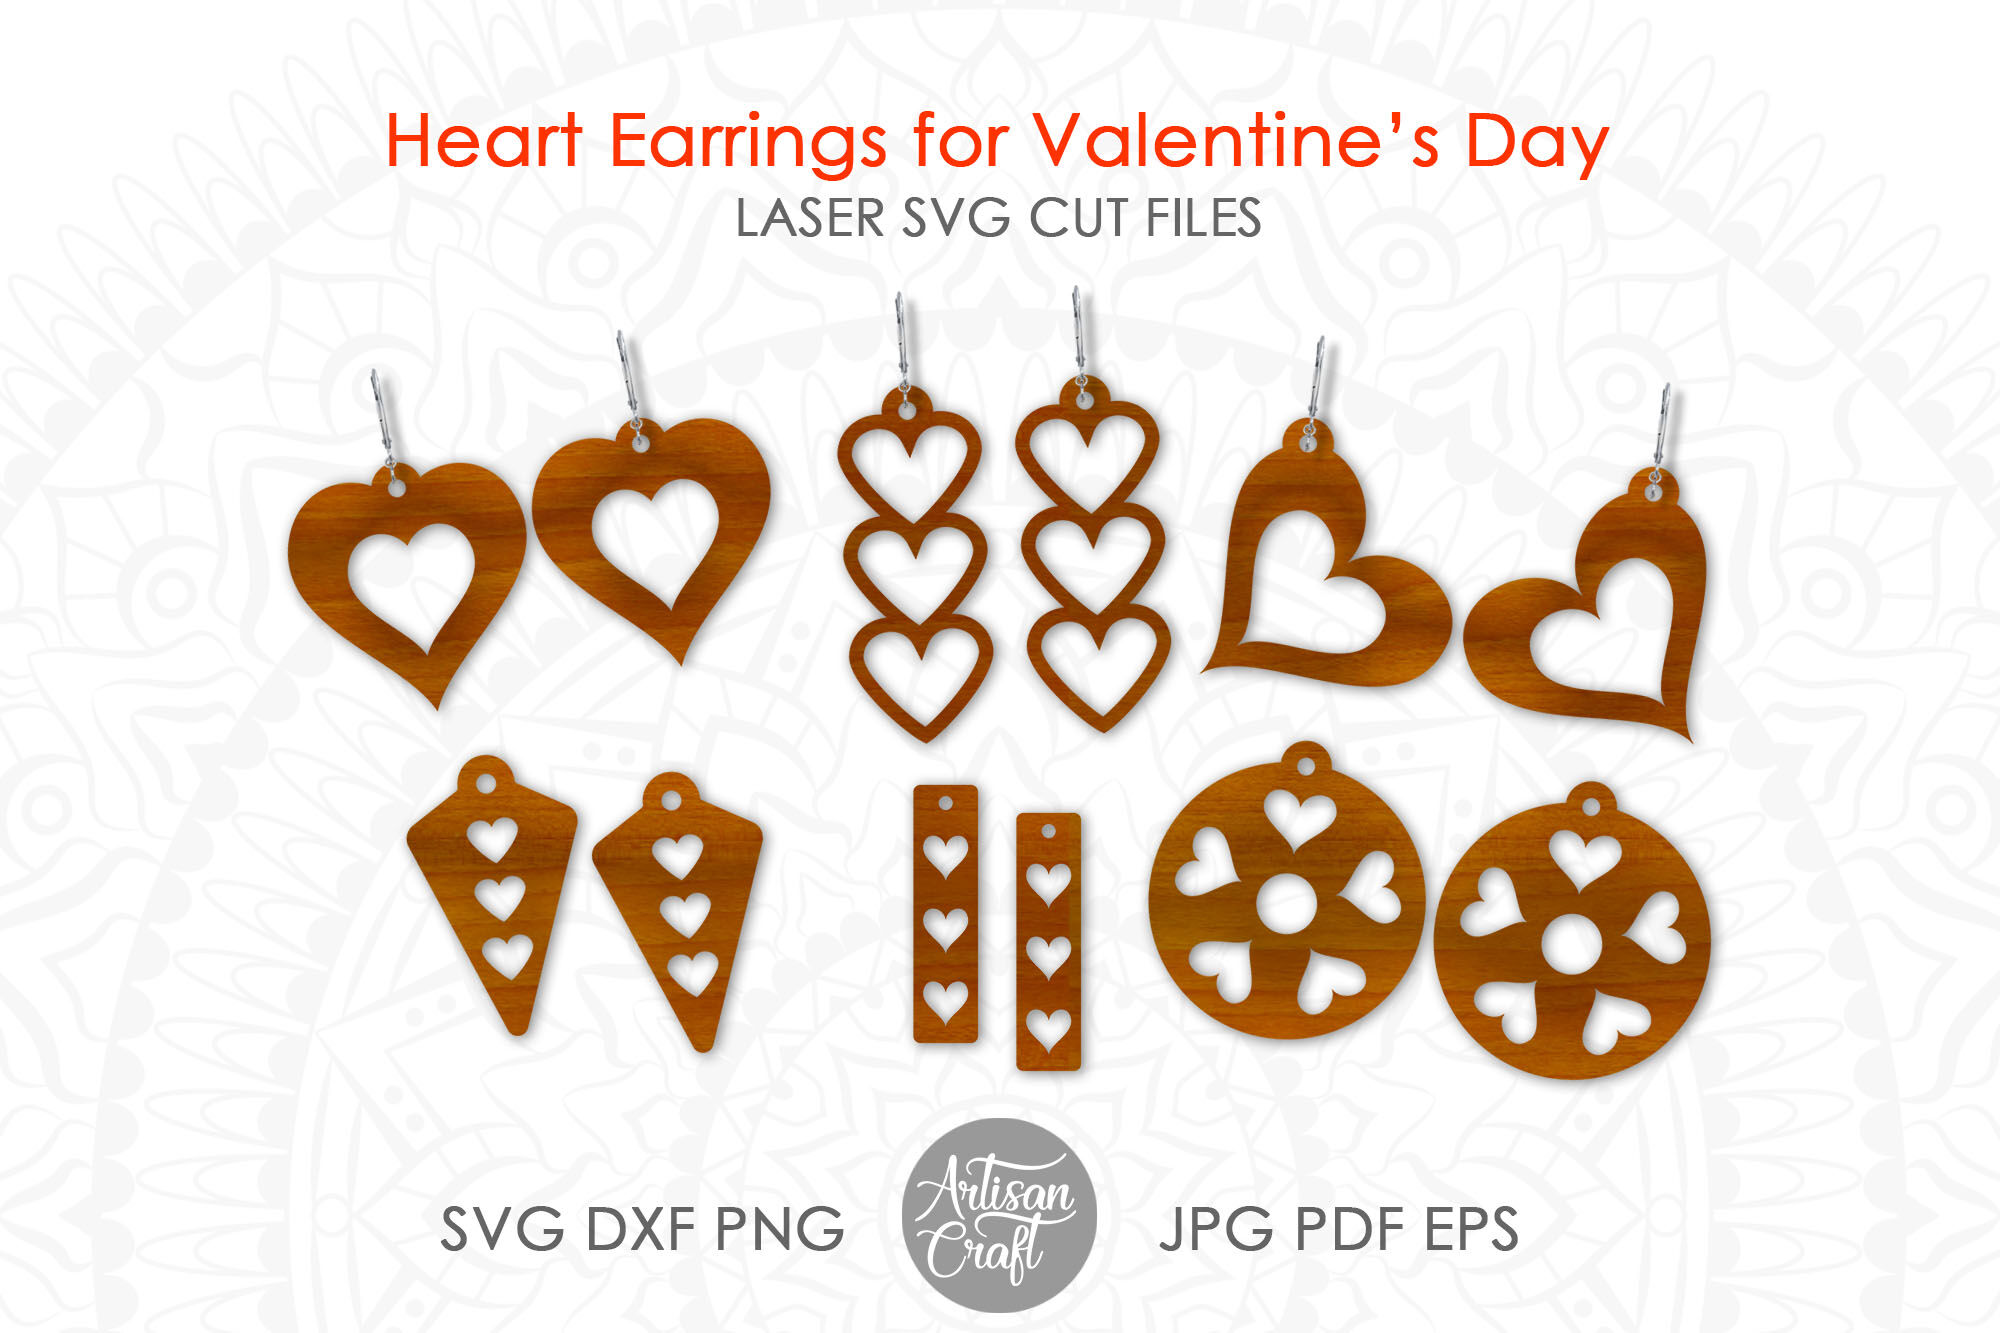 Bar Earrings, Valentines Earrings Graphic by Artisan Craft SVG